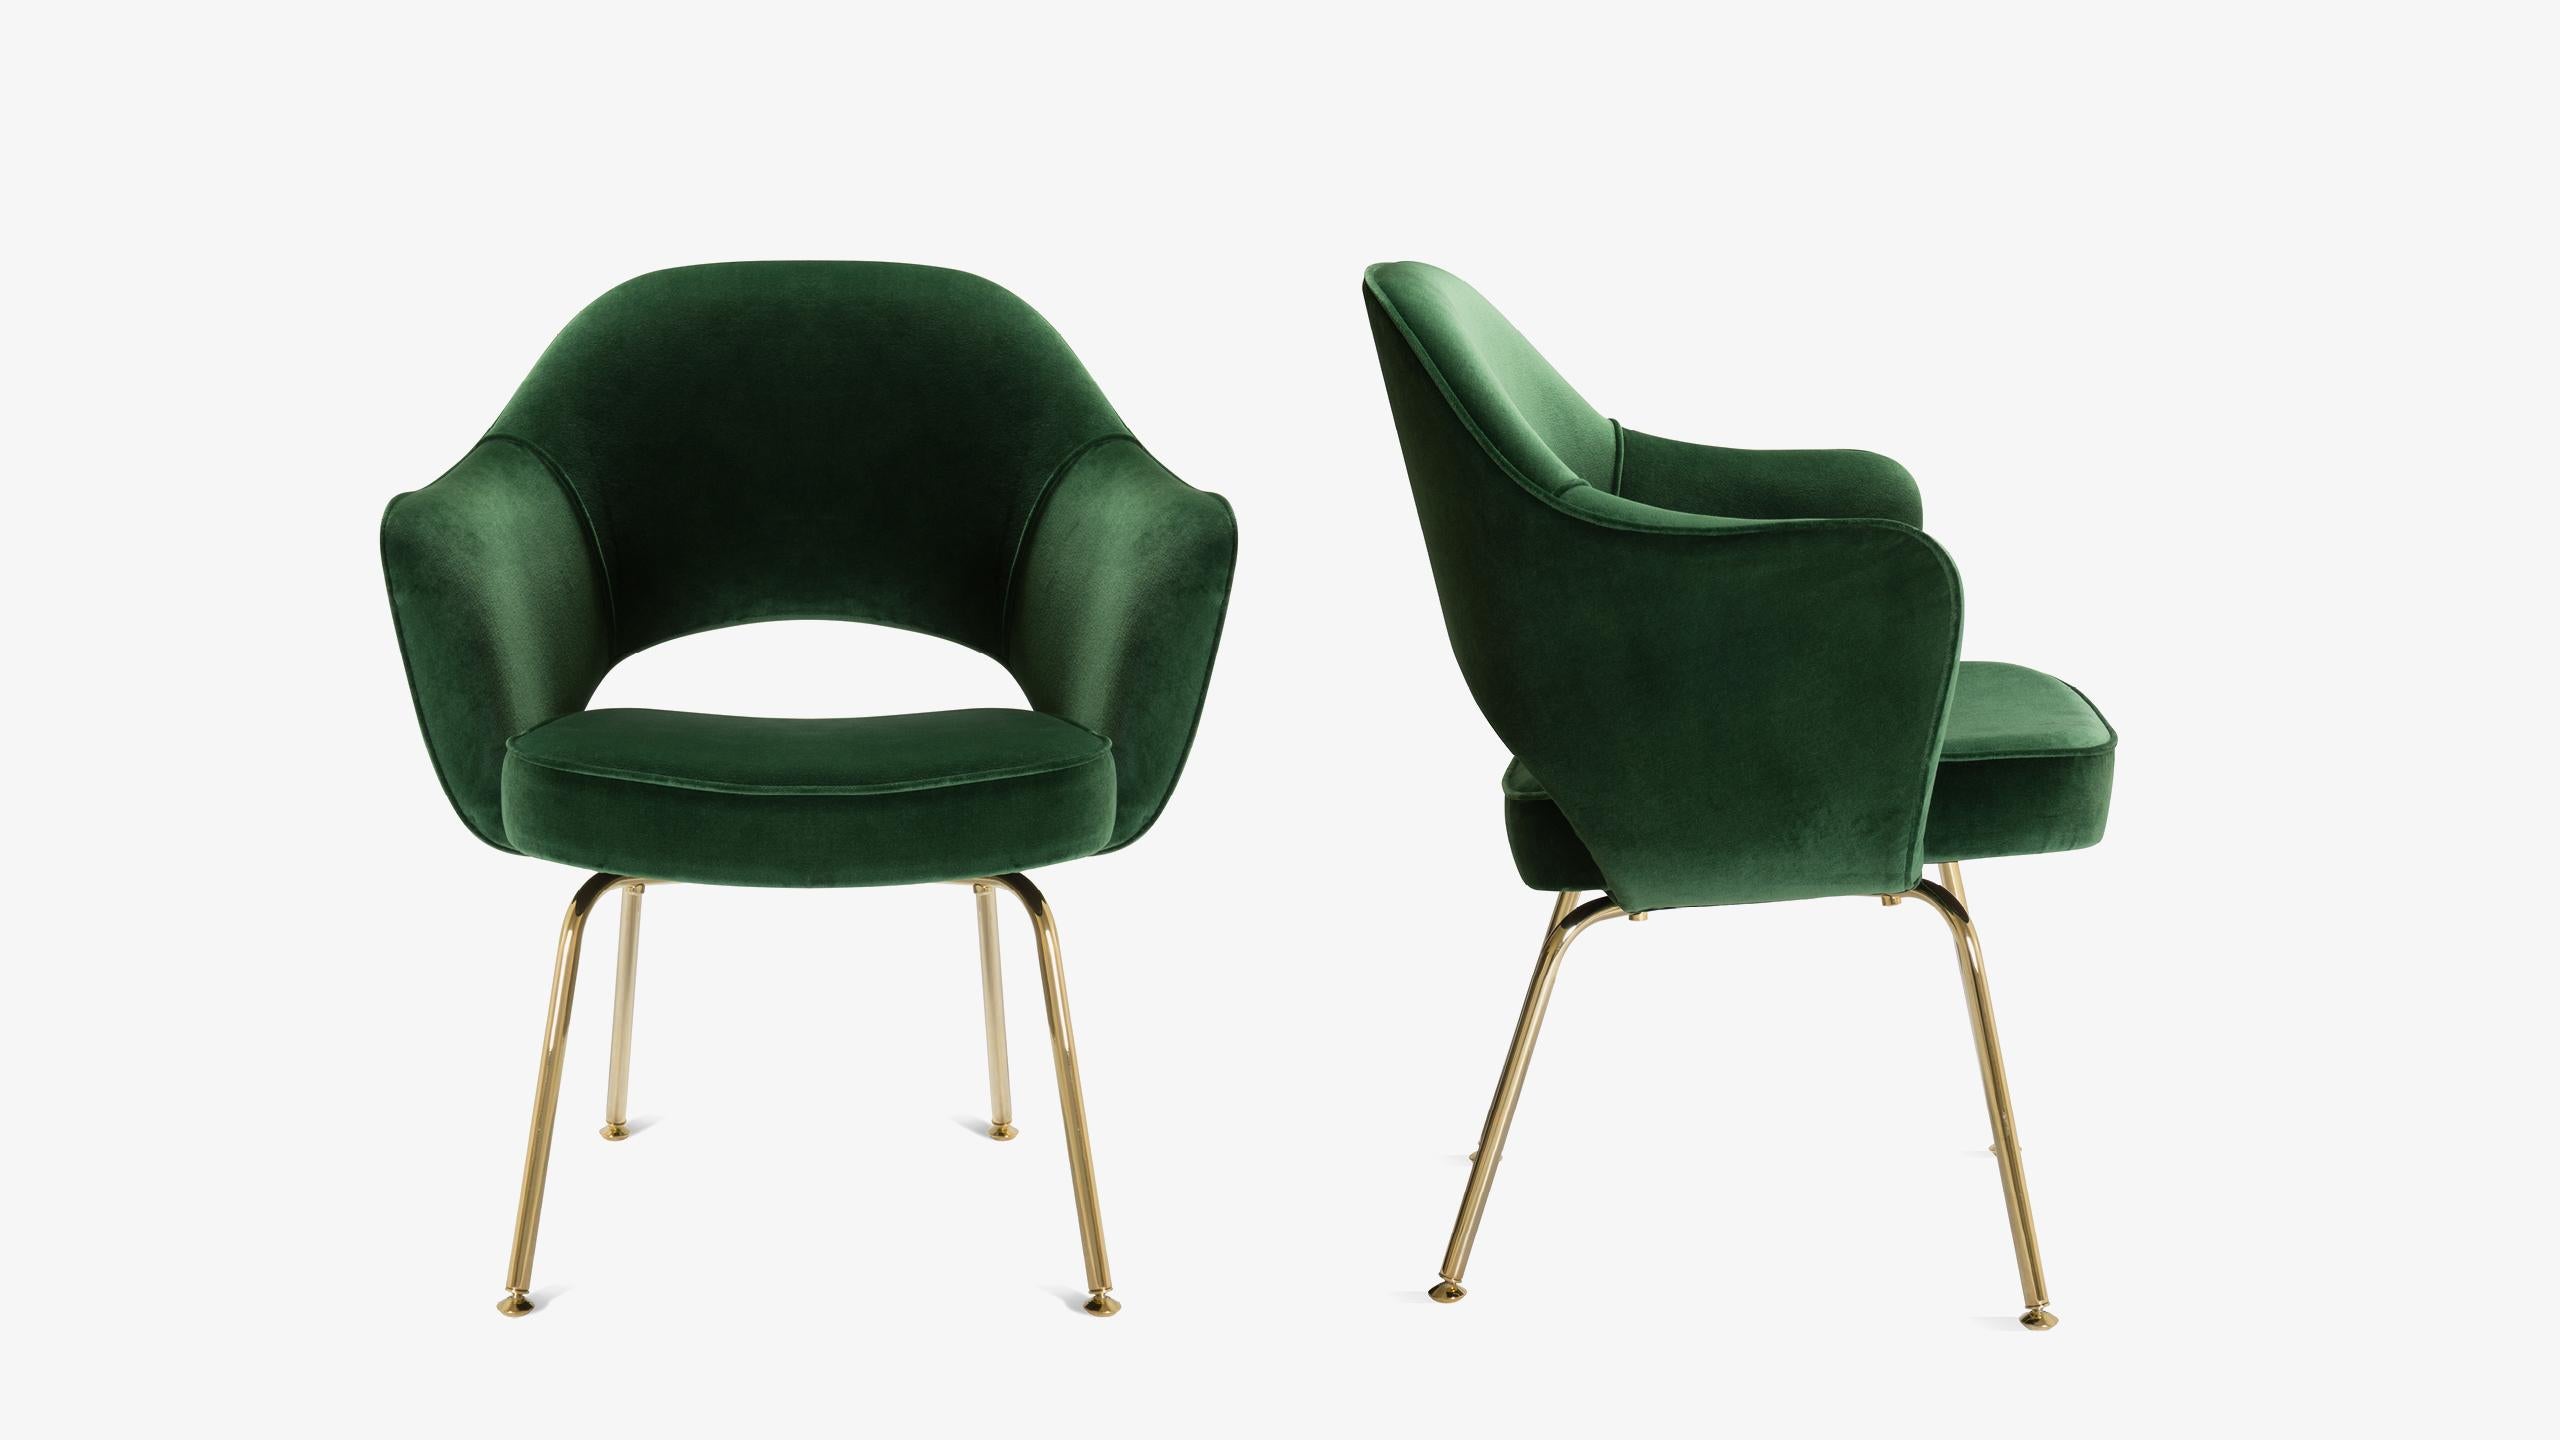 The next generation of Eero Saarinen's famed executive chairs have arrived, 100% authentic Eero Saarinen for Knoll executive chairs completely restored ground-up with an extra touch of gold.

We've been restoring Saarinen Executive chairs for